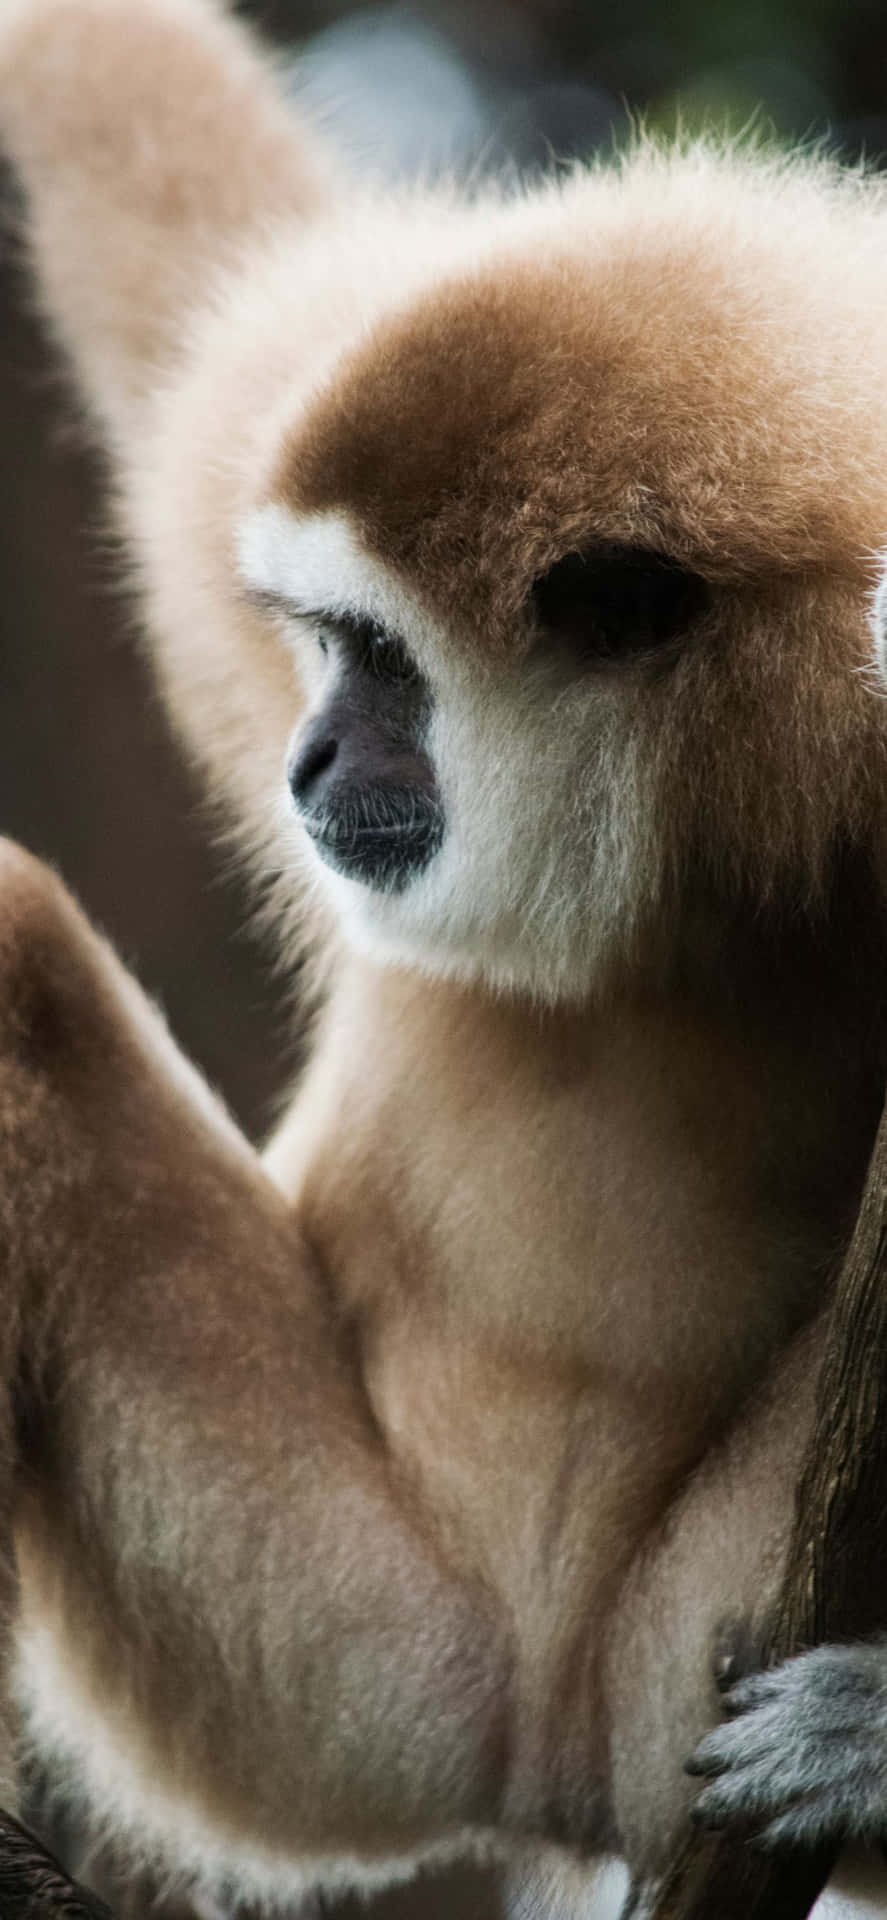 Get Inspired by iPhone Xs Max Gibbon